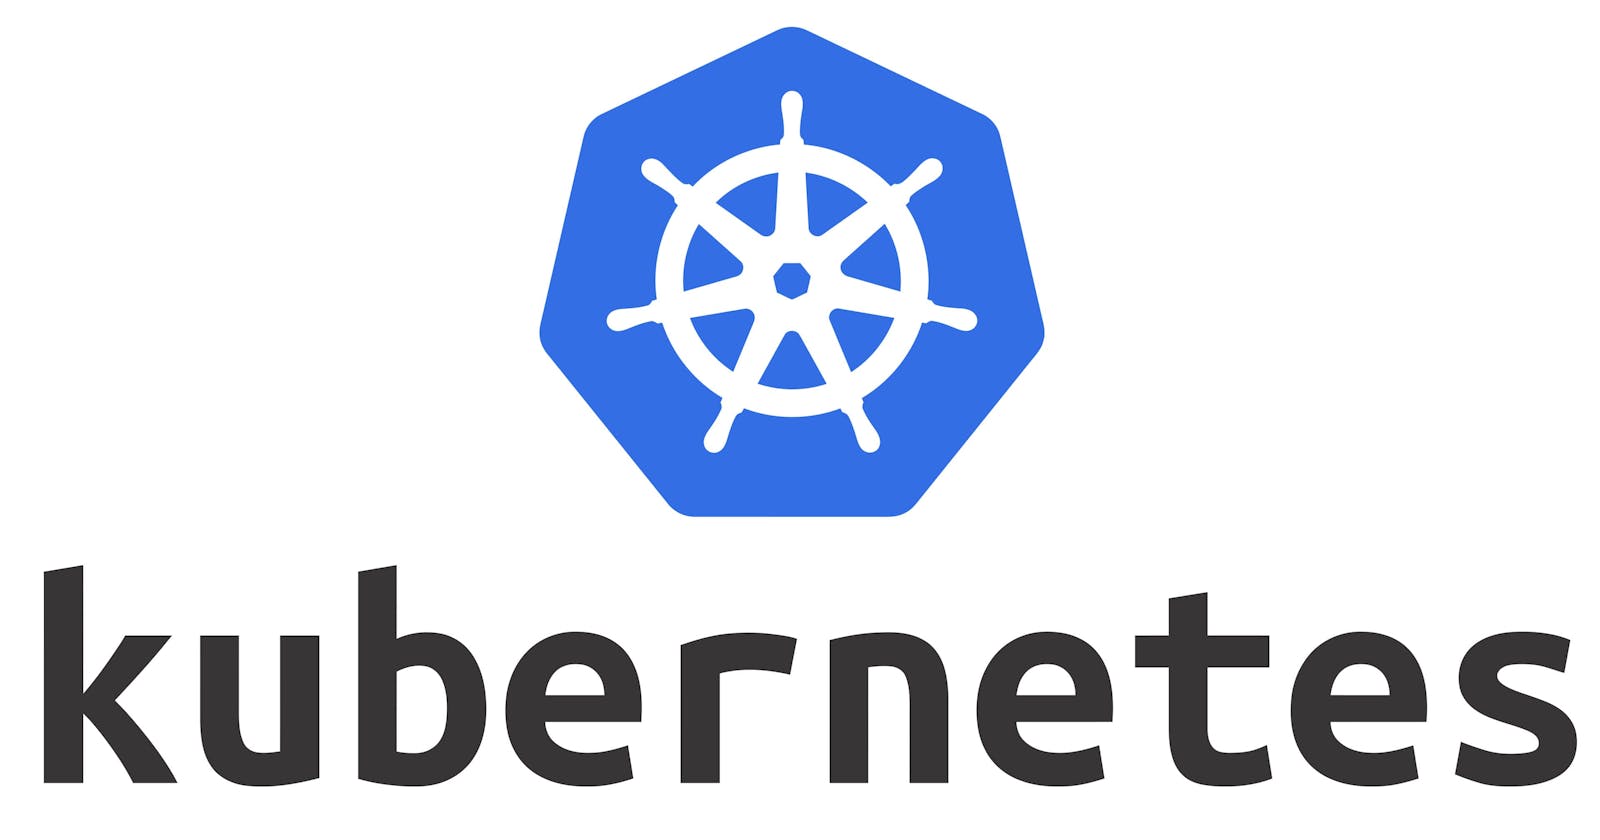 Types of Kubernetes Services